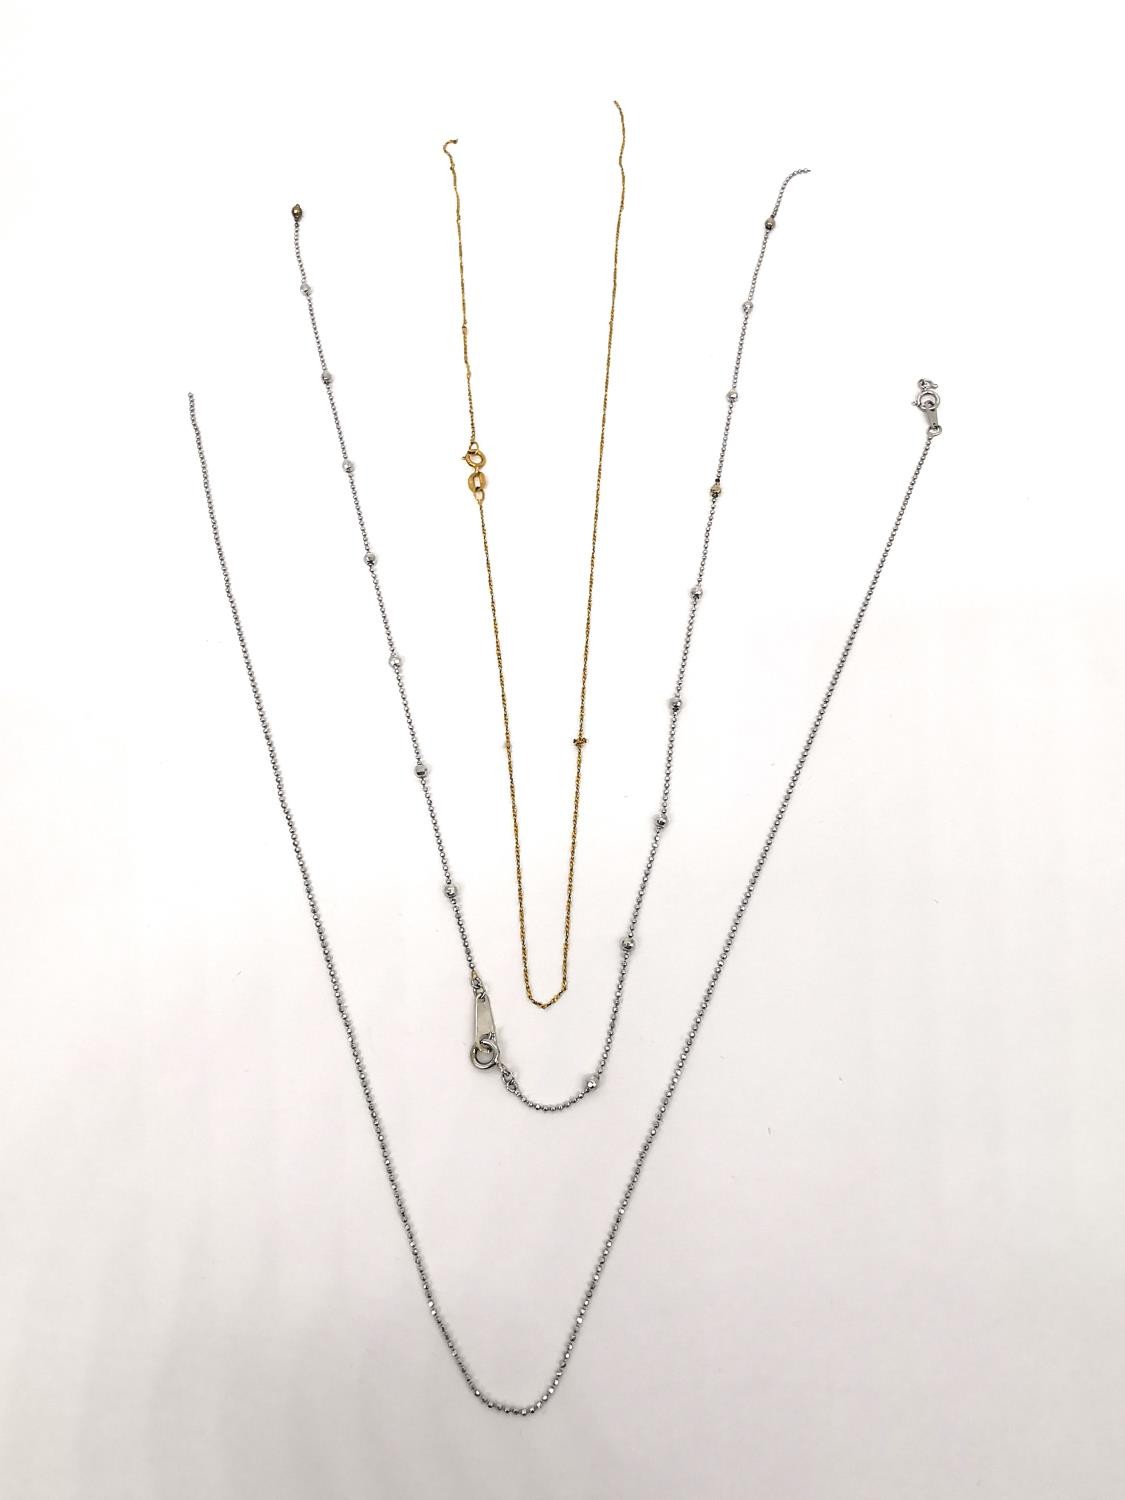 Three broken gold chain link necklaces. A 14ct white gold ball link chain. (Weight 1.50g). An 18ct